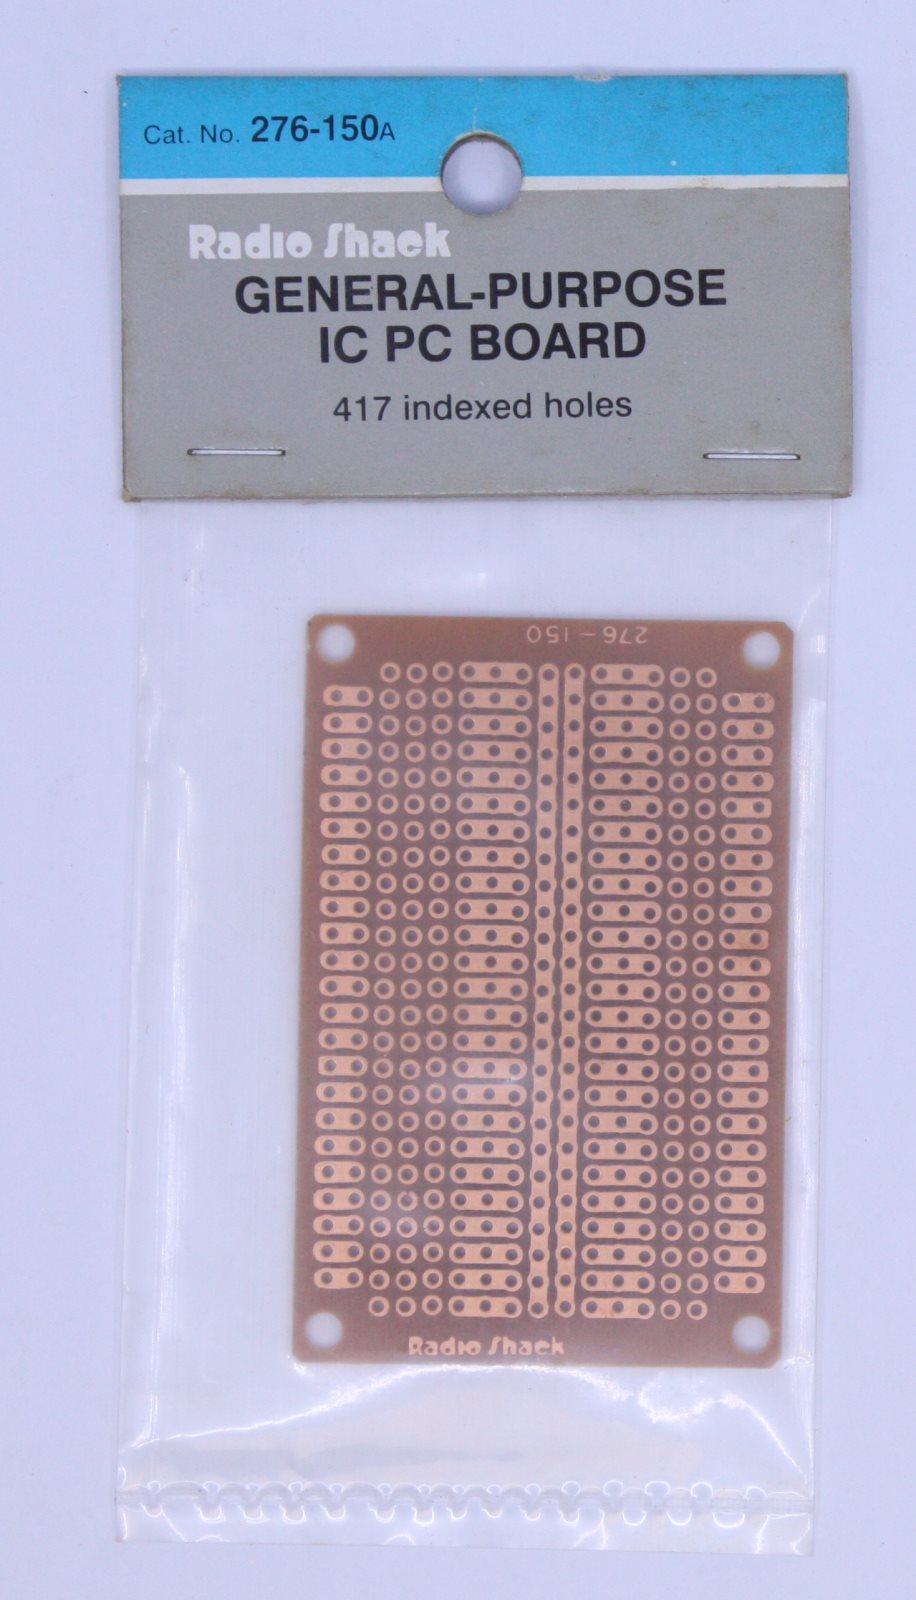 Radio Shack 276-150A 417 Indexed Holes General Purpose IC PC Board